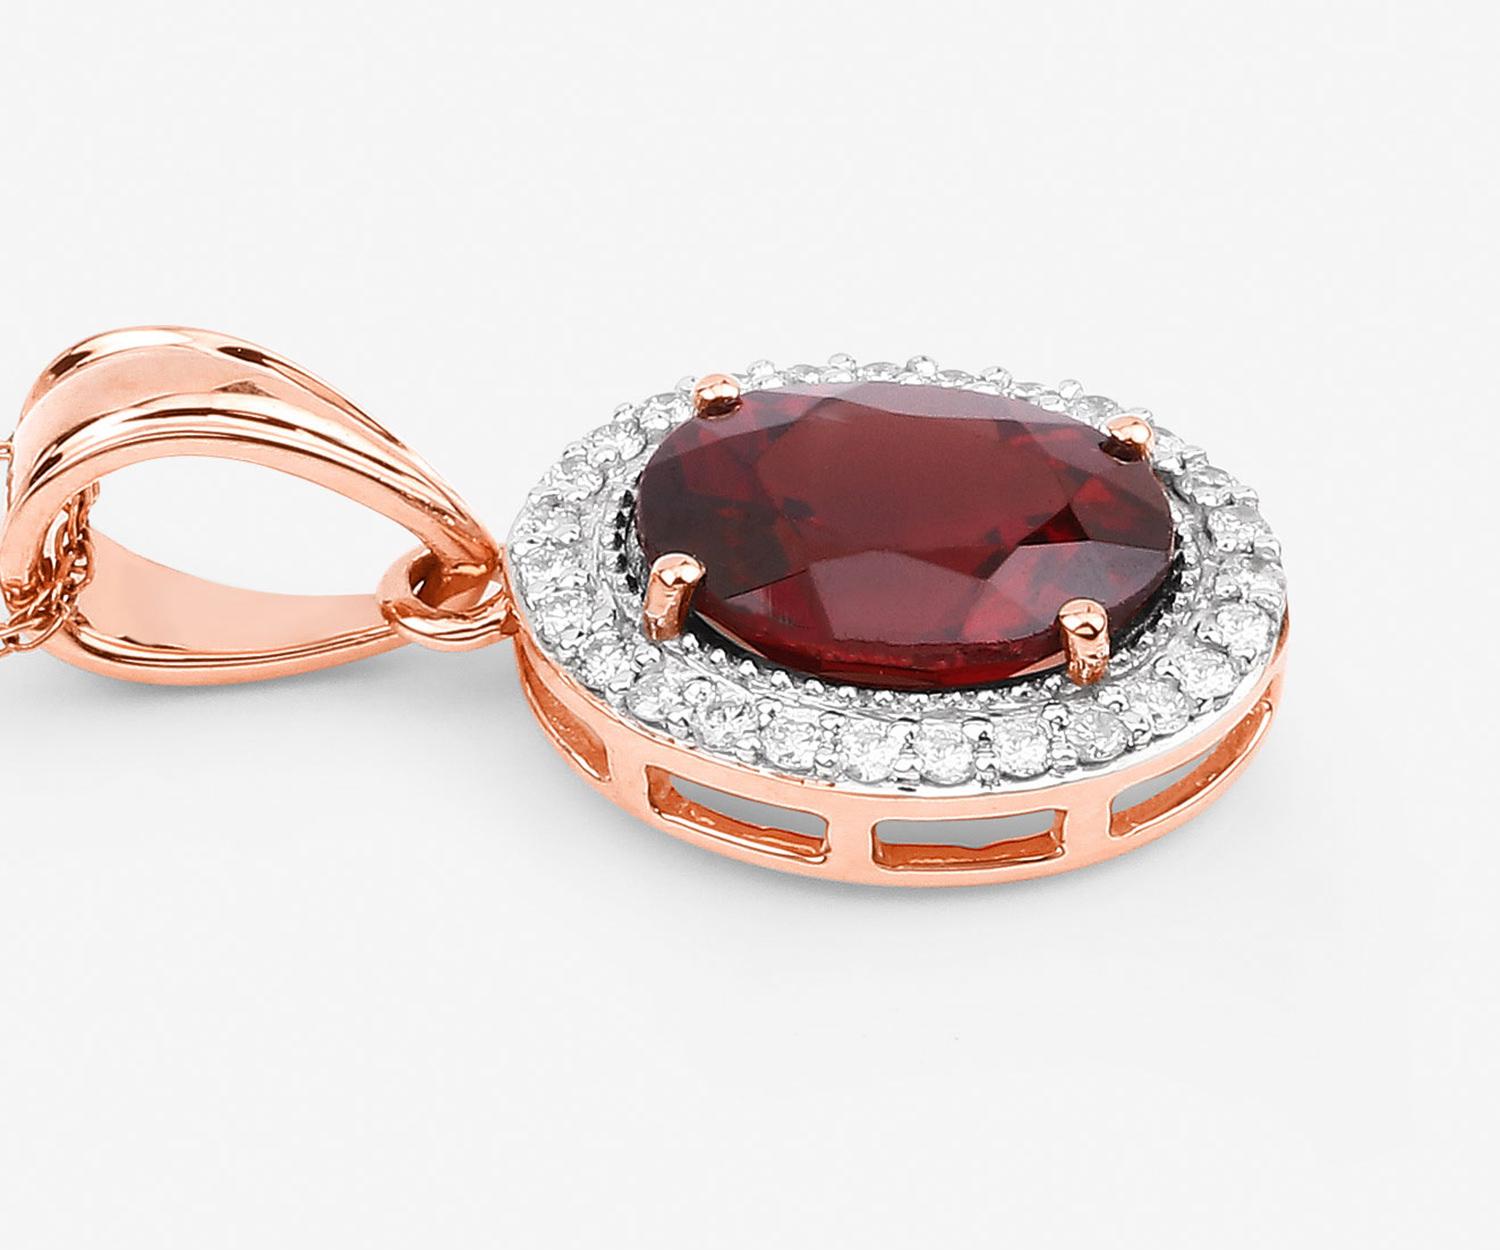 Natural Rhodolite Garnet and Diamond Halo Pendant 3 Carats 14k Rose Gold In Excellent Condition For Sale In Laguna Niguel, CA